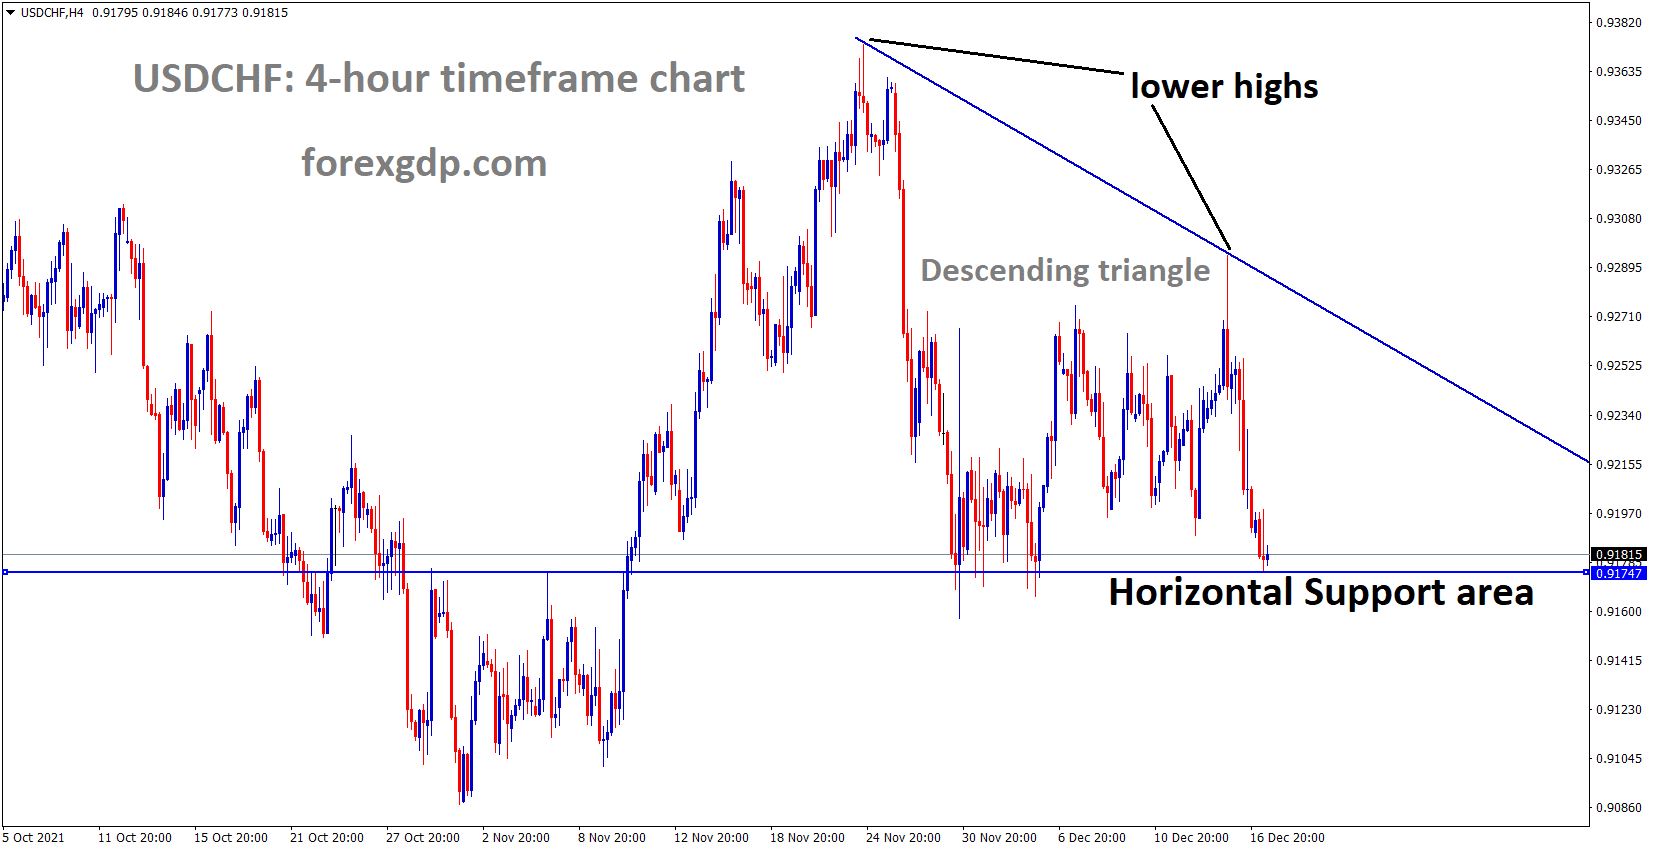 USDCHF is moving in the Descending triangle pattern and the market reached the Horizontal support area.